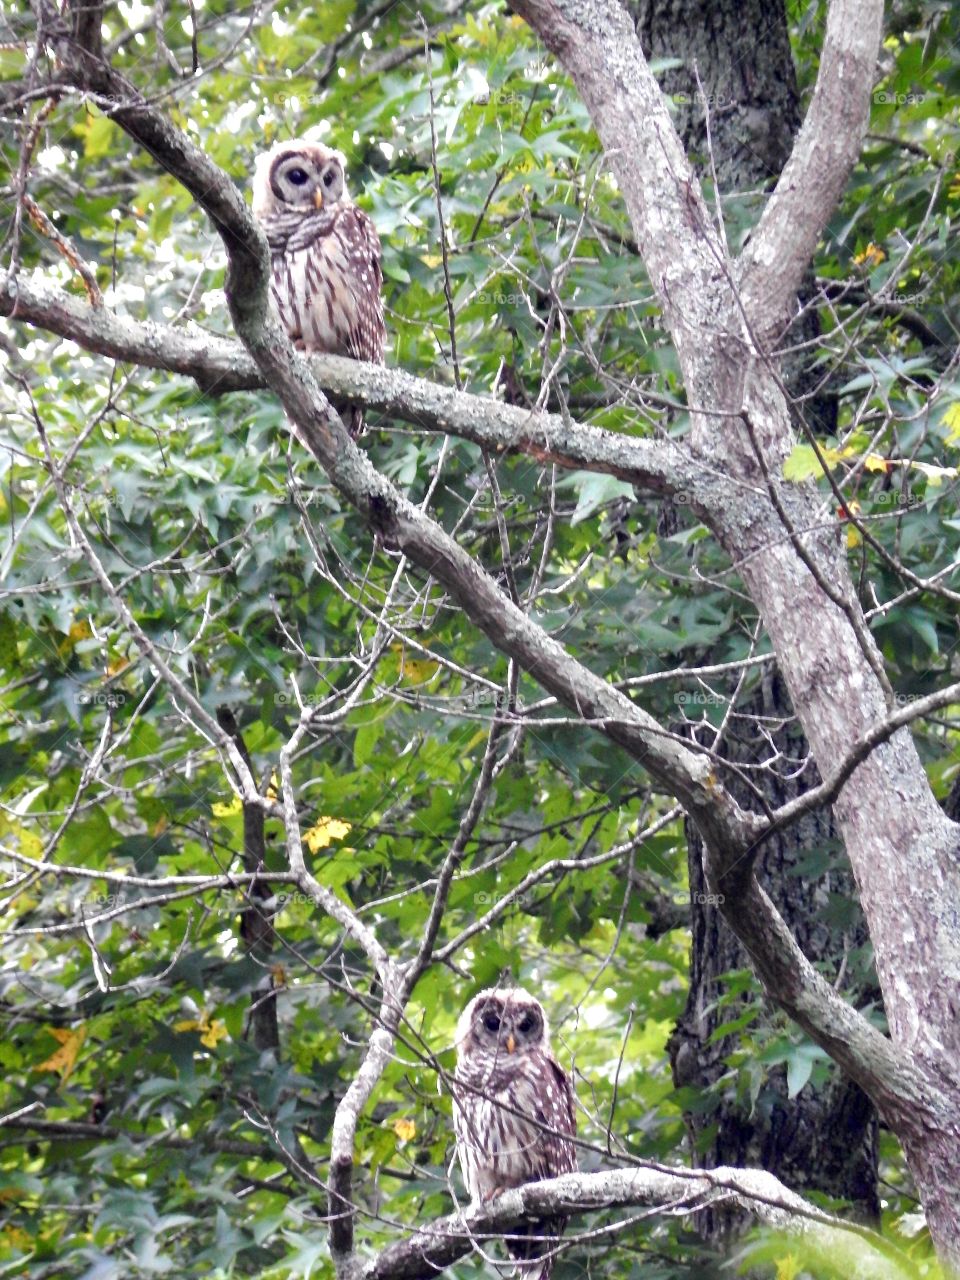 Two Screech Owls in the wild